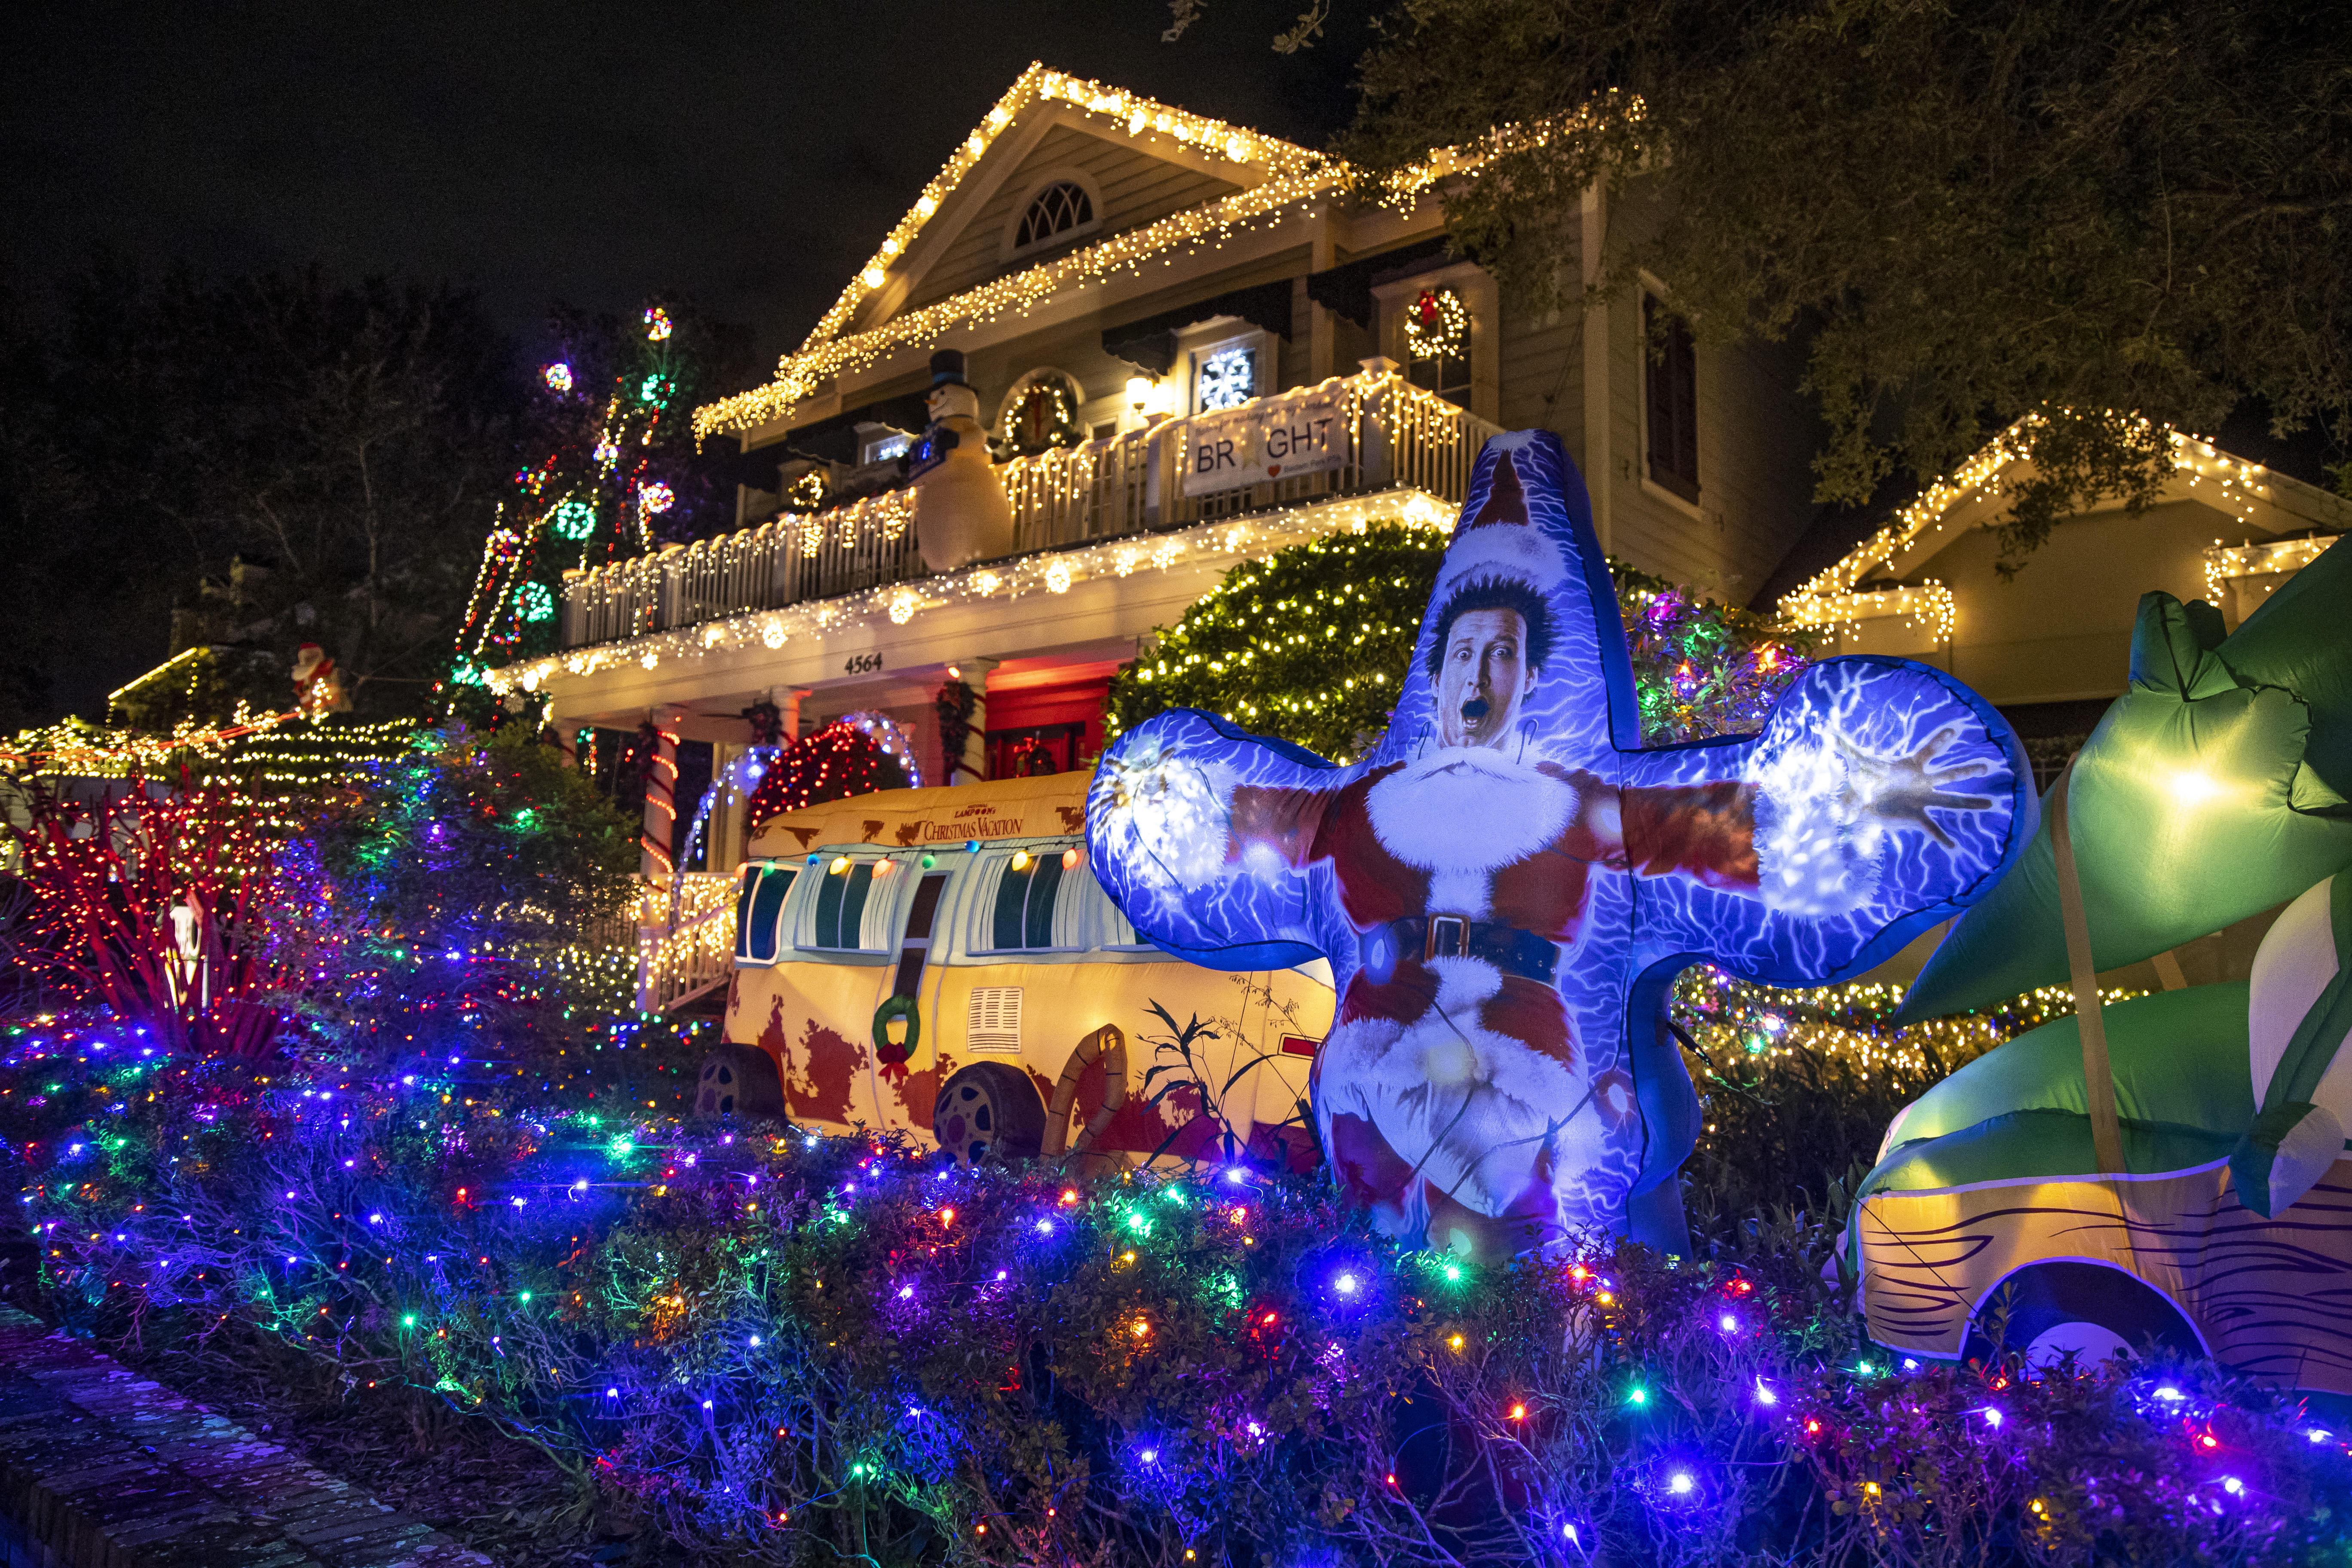 Twinkly Awards: Central Florida's home holiday light – Orlando Sentinel